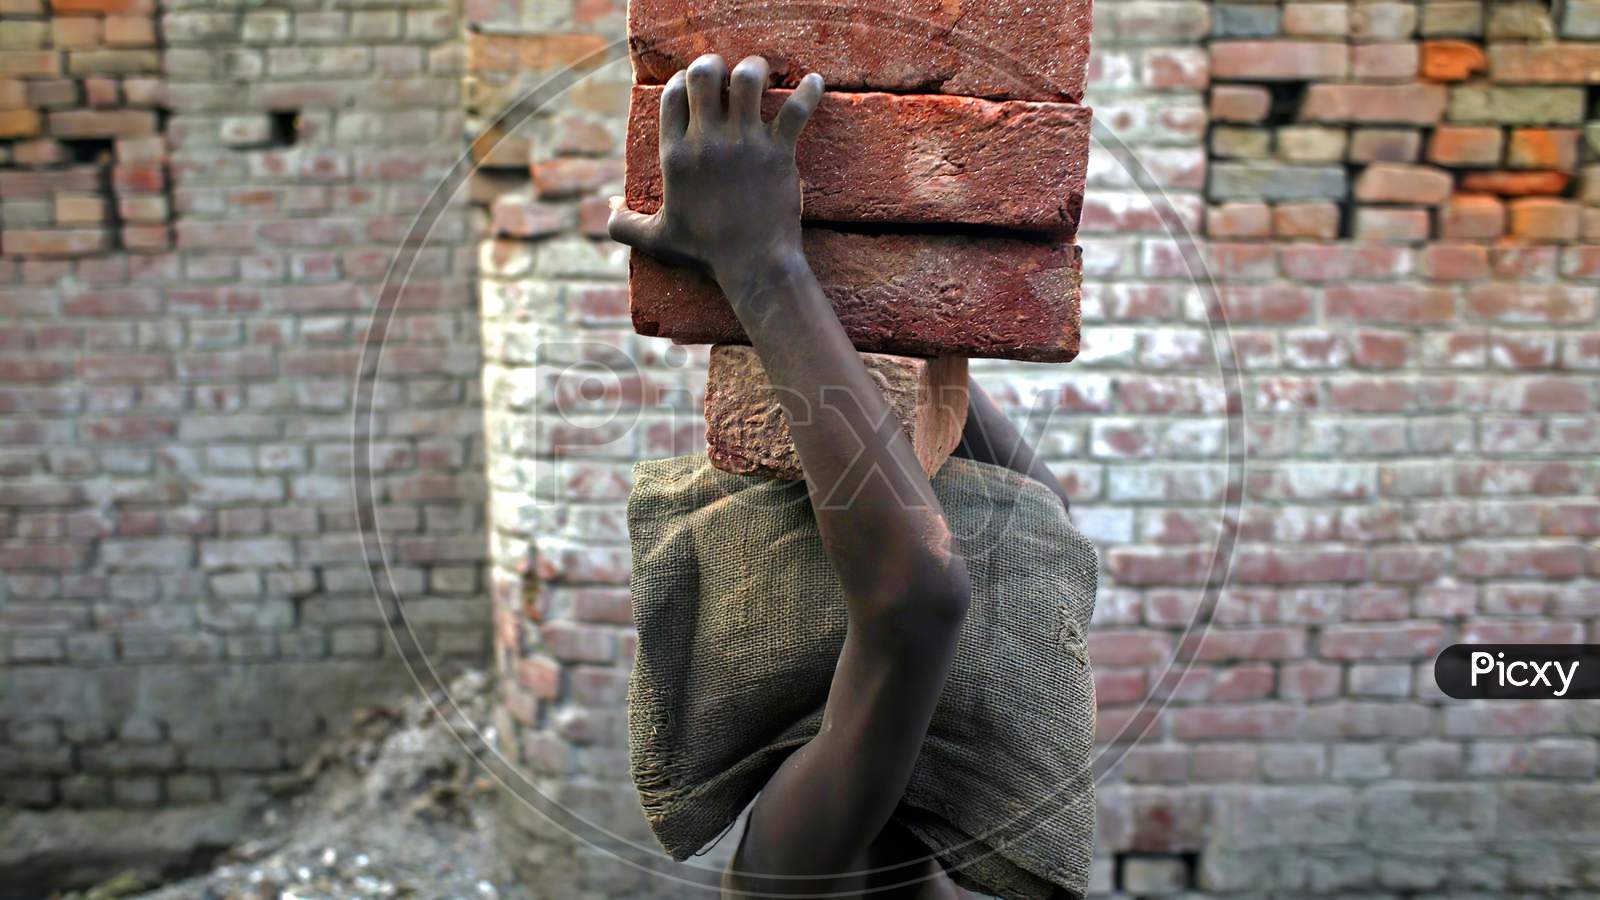 A poor worker carrying heavy bricks on her head.